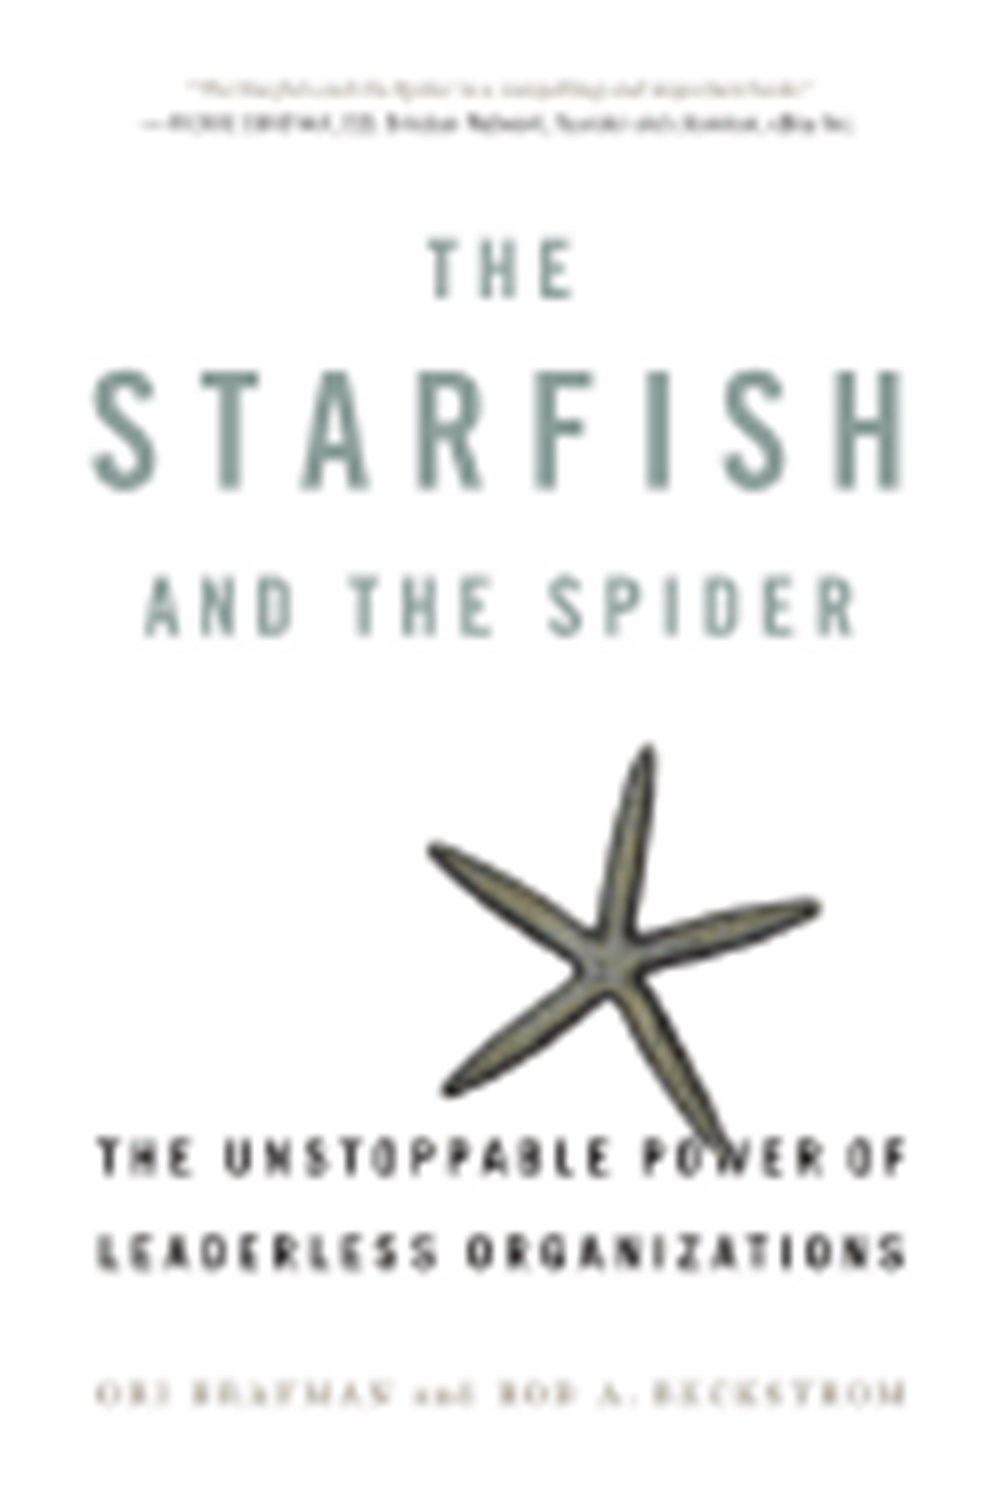 Starfish and the Spider: The Unstoppable Power of Leaderless Organizations